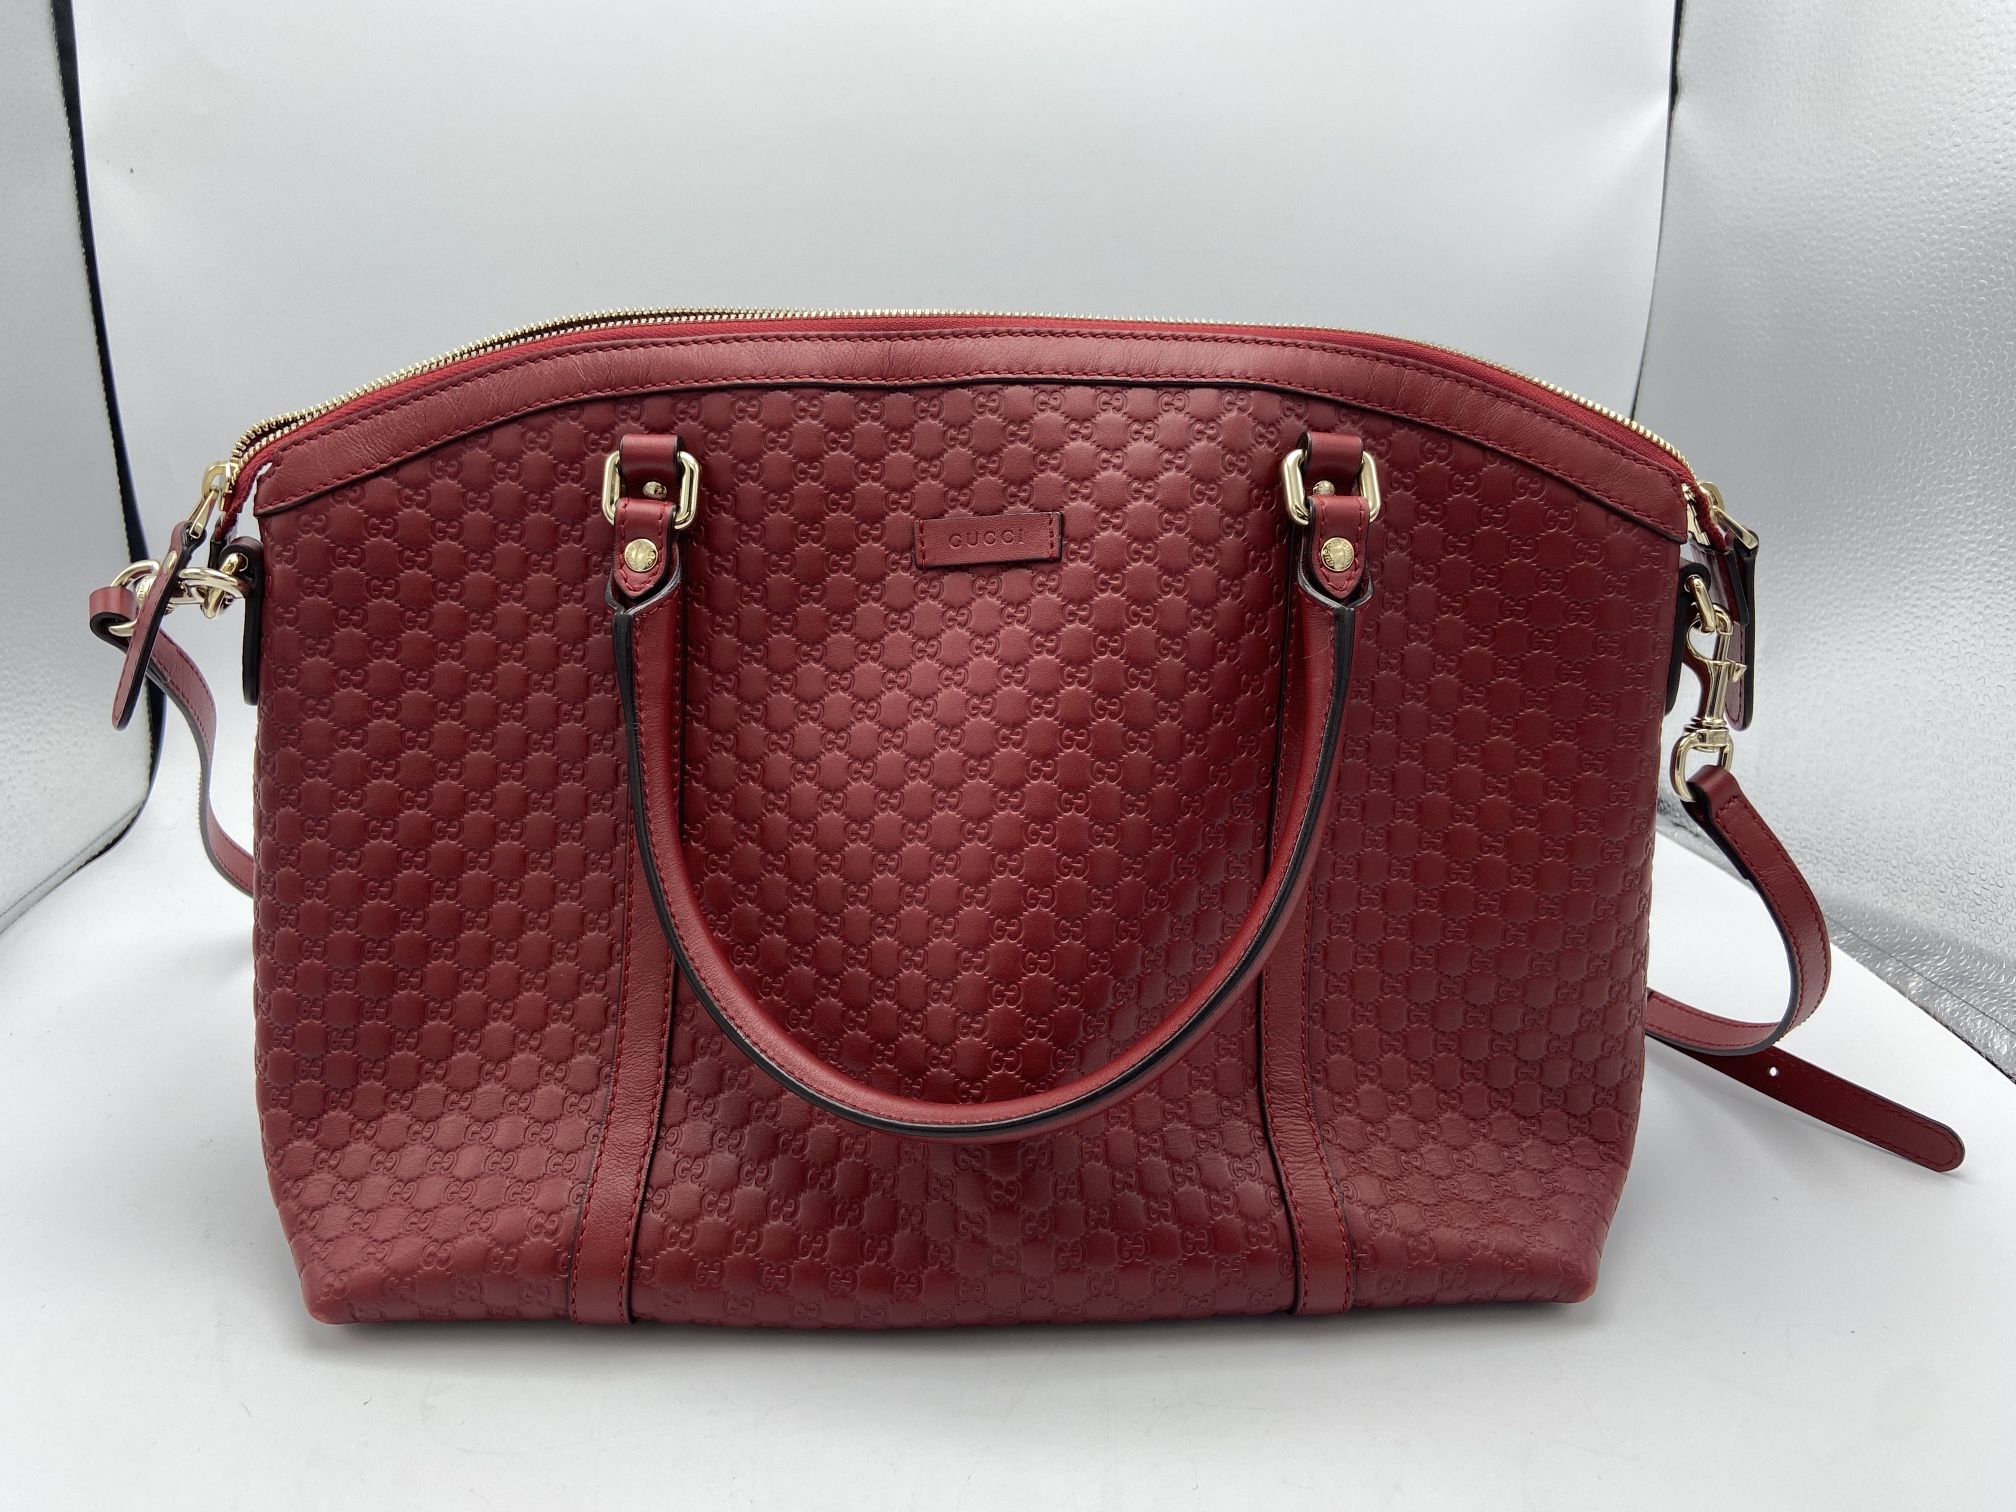 Gucci Red Guccissmma Leather Margaux Tote Bag